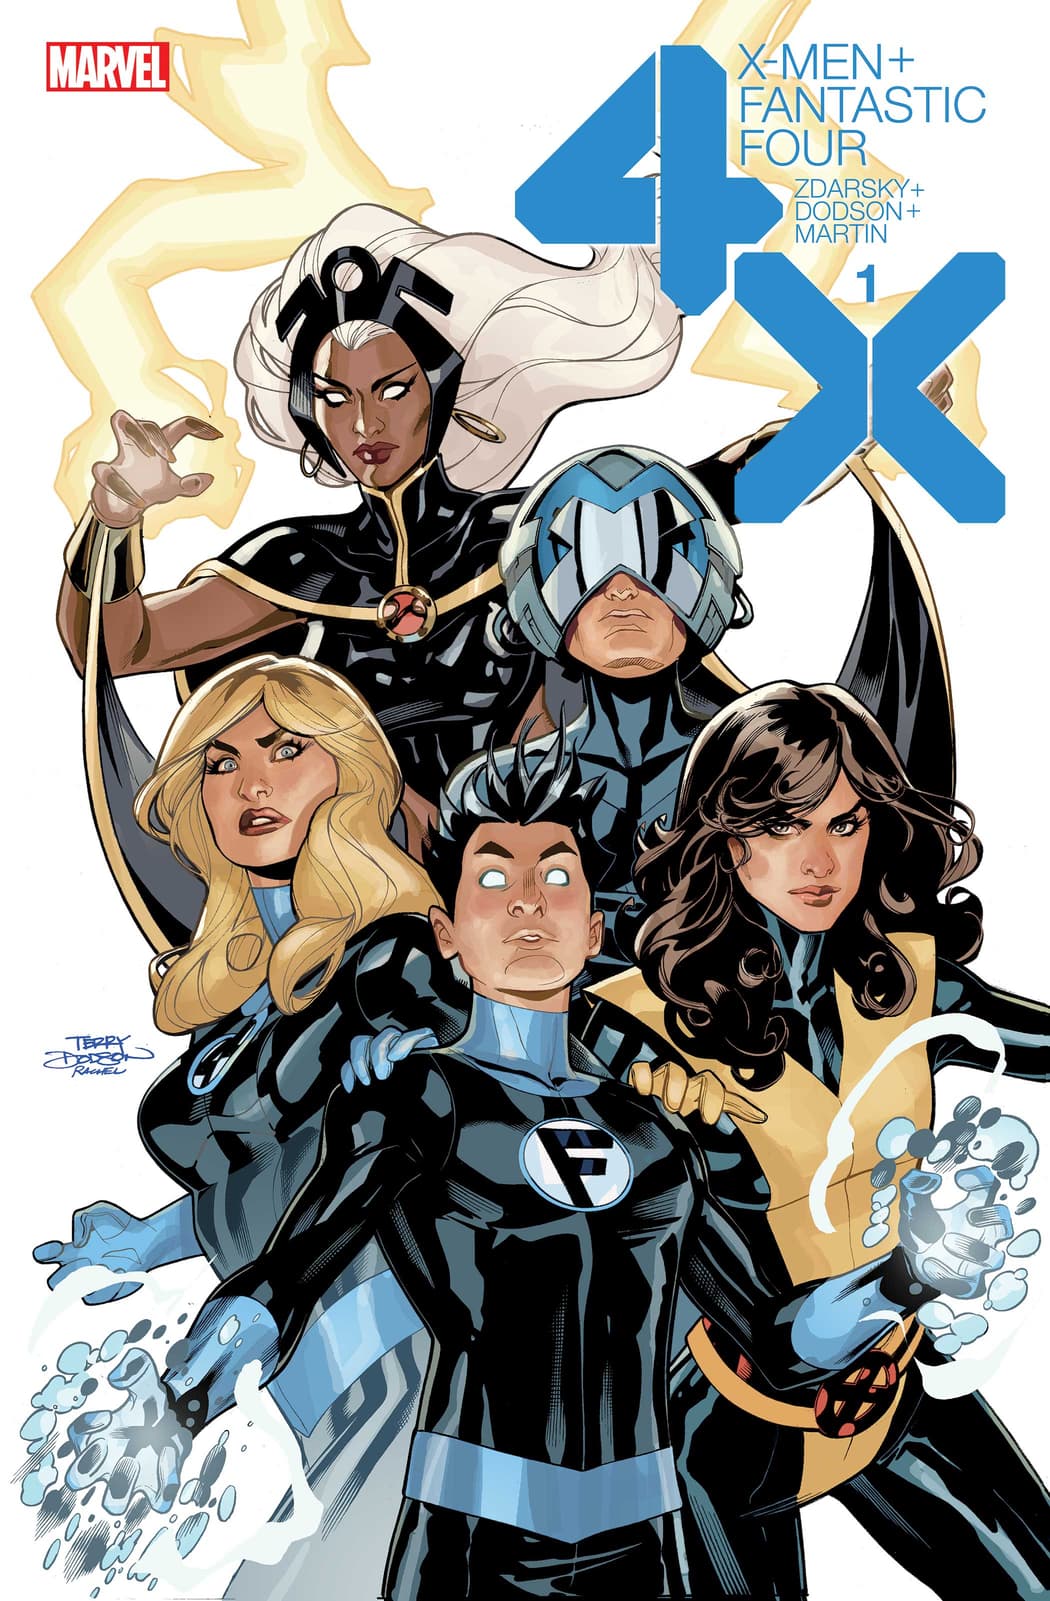 X-MEN/FANTASTIC FOUR #1 cover by Terry Dodson